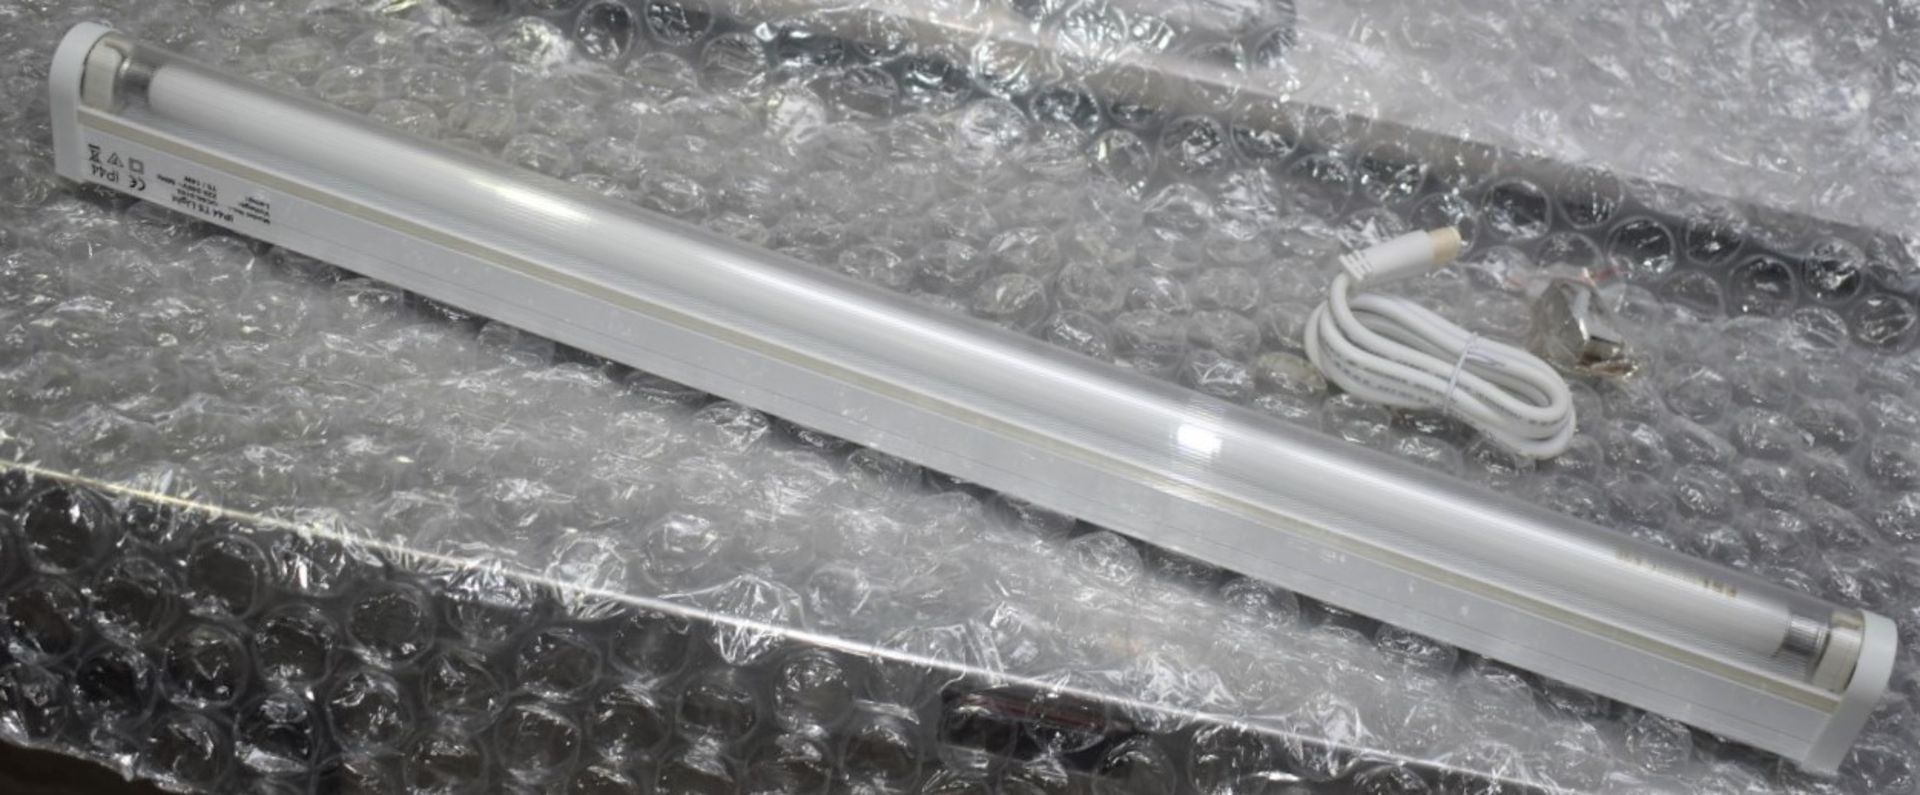 1 x Bathroom Light Fitting - IP44 Waterproof T5 14w Fluorescent Lights With Built-In Electronic - Image 10 of 11